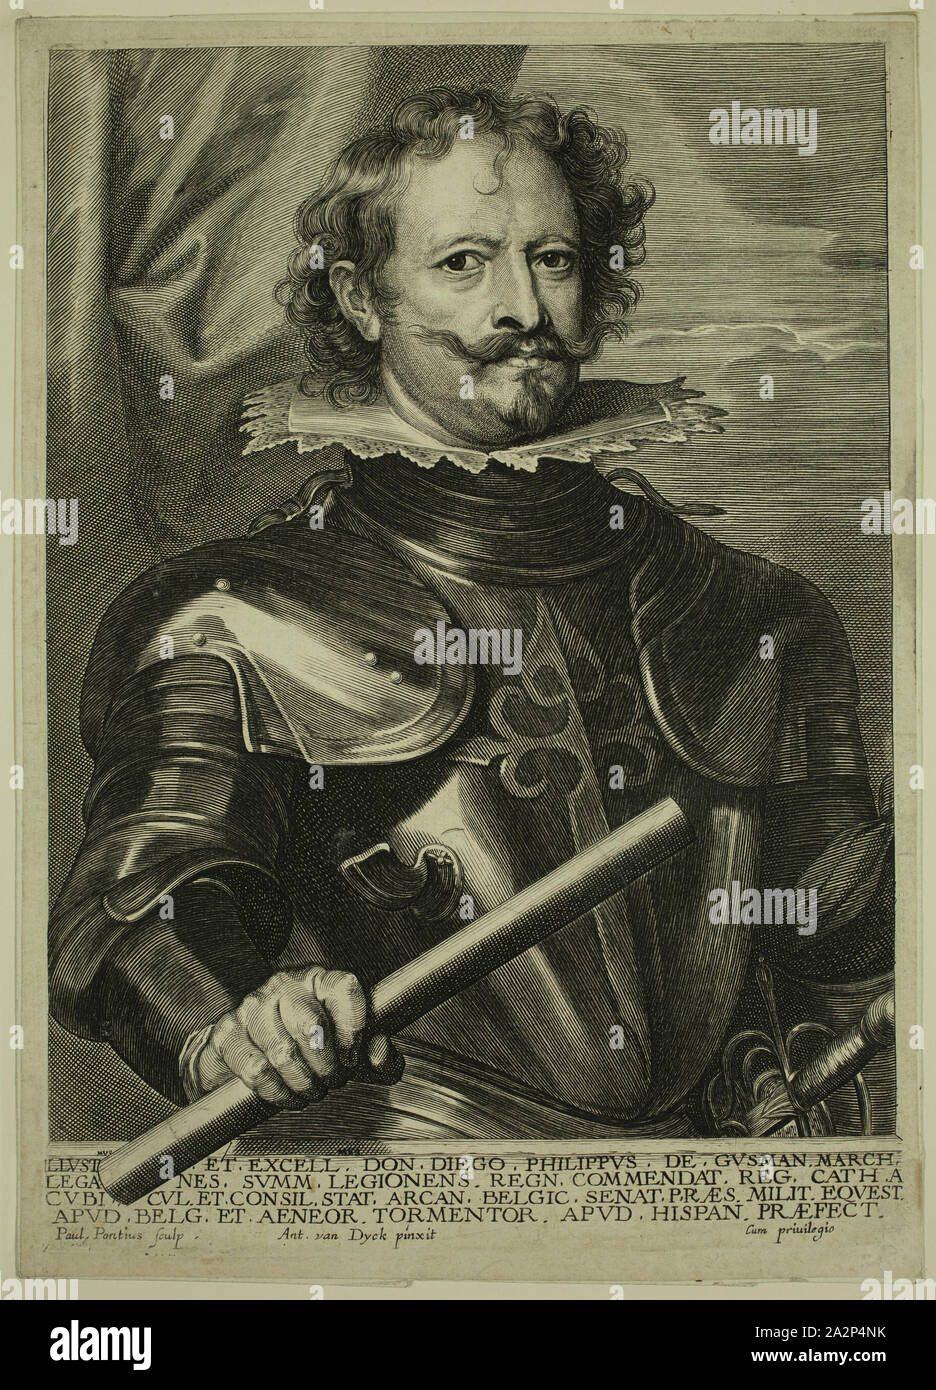 Paul Pontius, Flemish, 1603-1658, after Anton van Dyck, Flemish, 1599-1641, Don Diego Philip de Gusman, mid-17th century, engraving printed in black ink on laid paper, Plate: 9 5/8 × 6 7/8 inches (24.4 × 17.5 cm Stock Photo